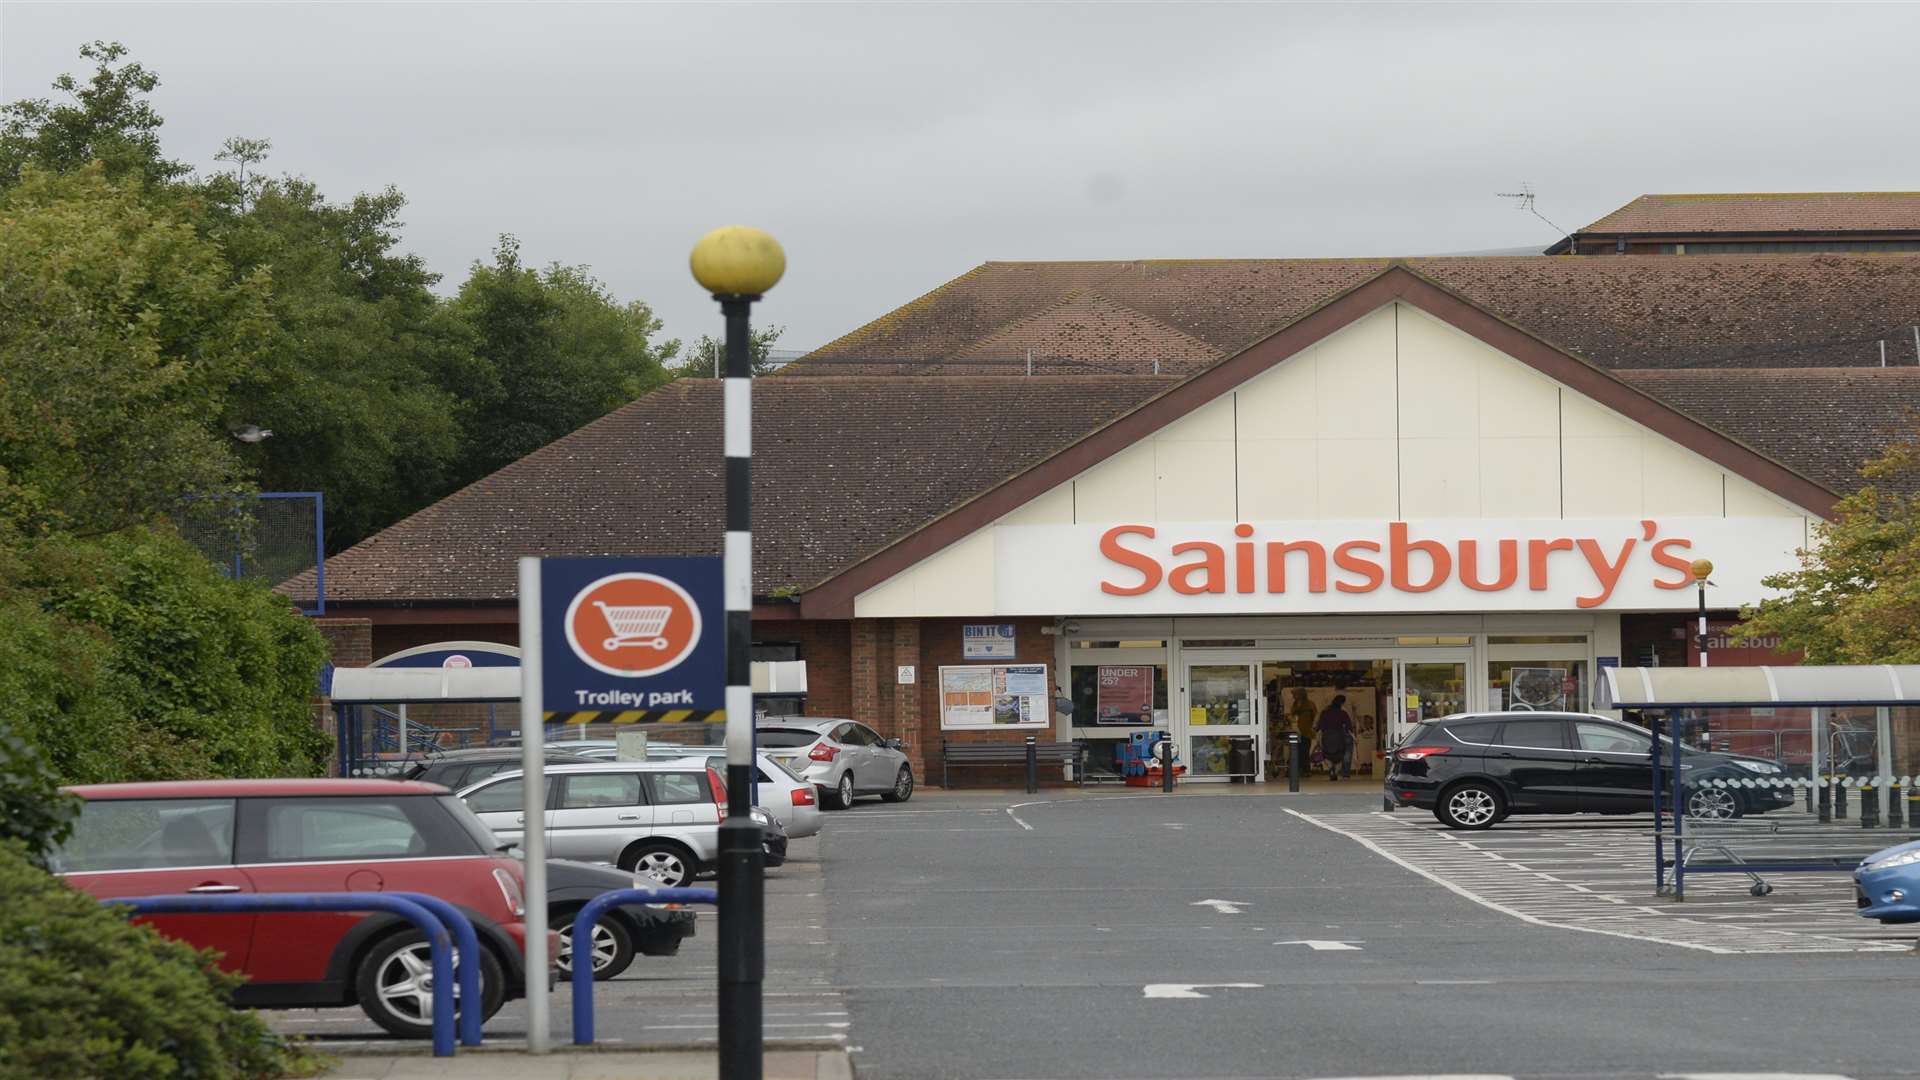 The incident happened at Sainsbury's in Chestfield